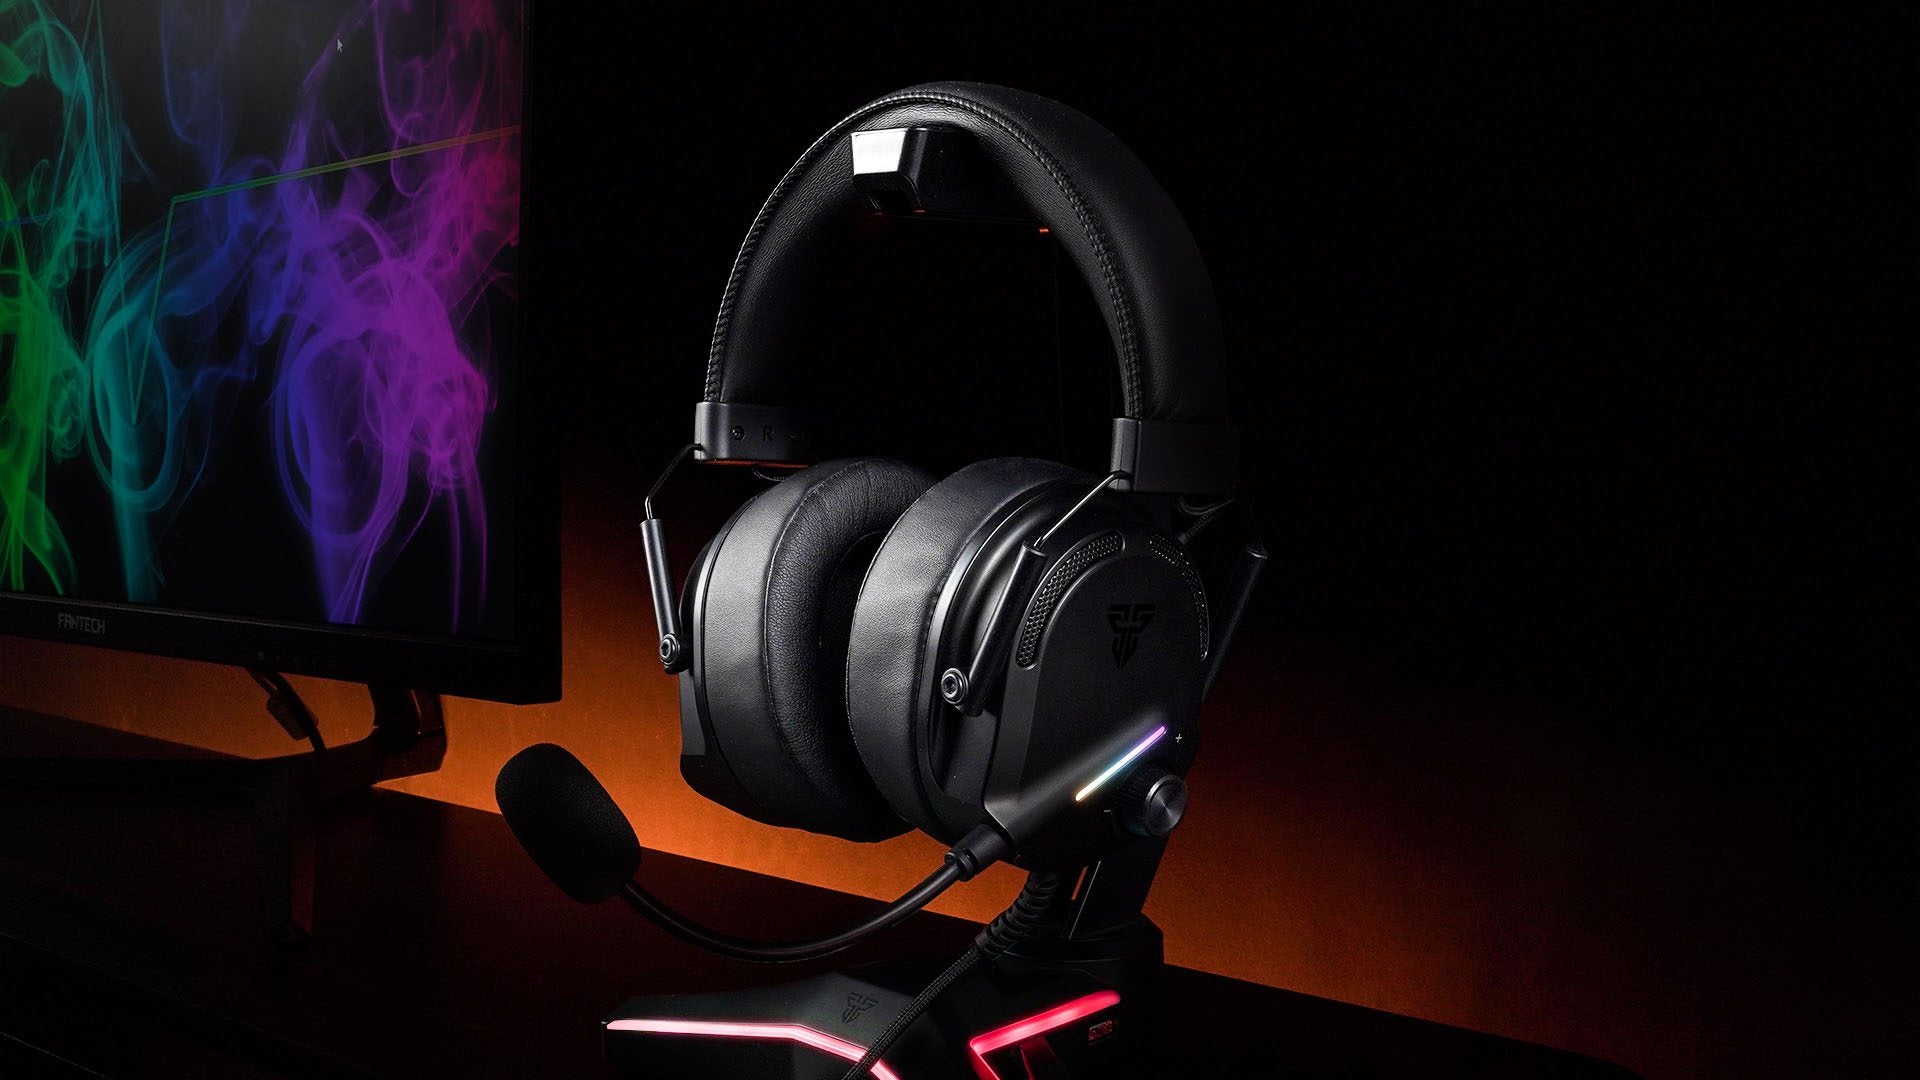 The Story of ALTO & ALTO 7.1 Gaming Headsets